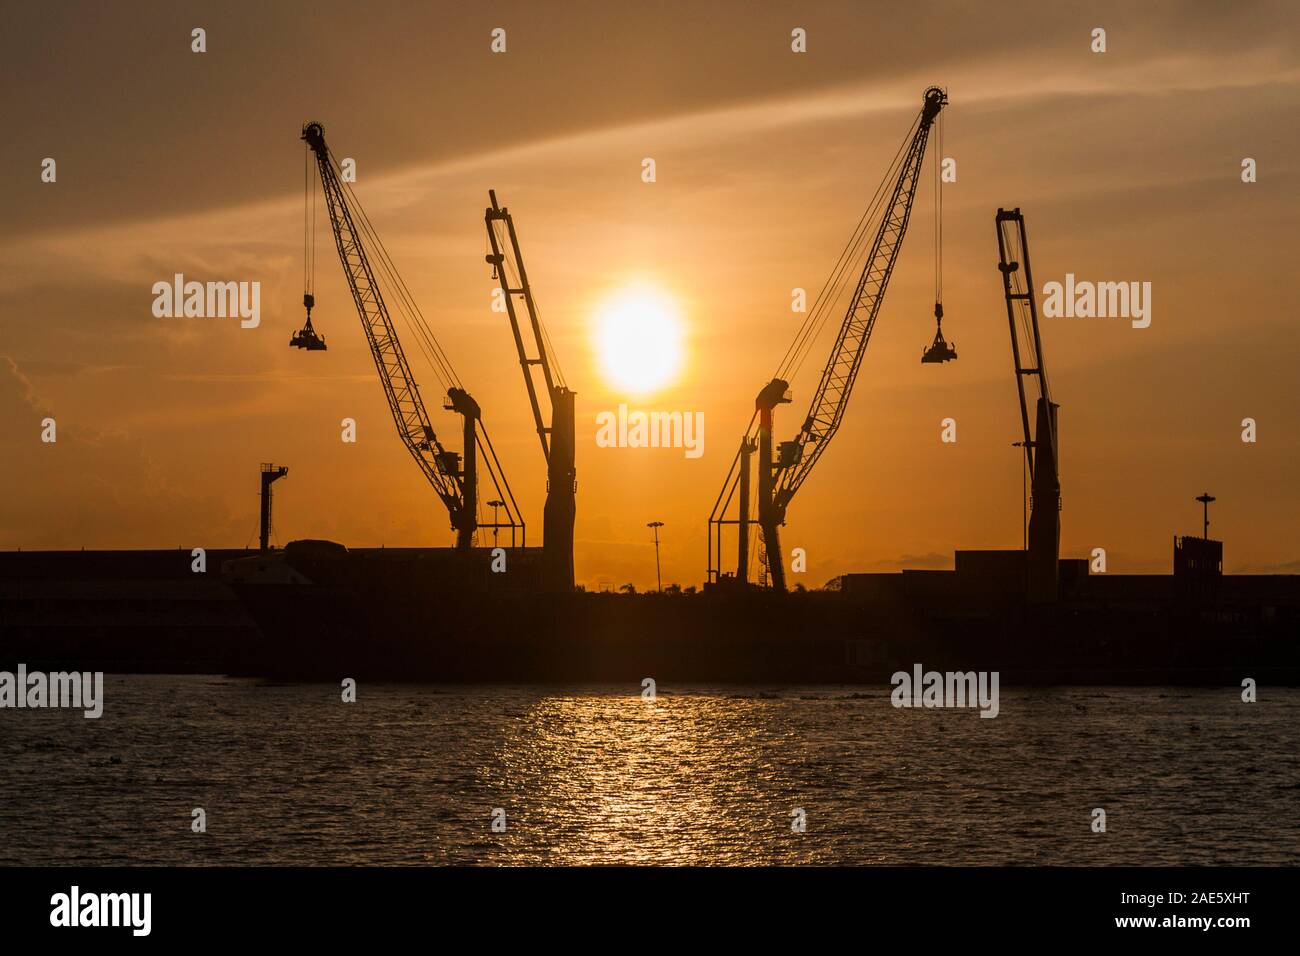 Industrial cranes silhouetted against the sunset in Barranquilla, Colombia. Stock Photo